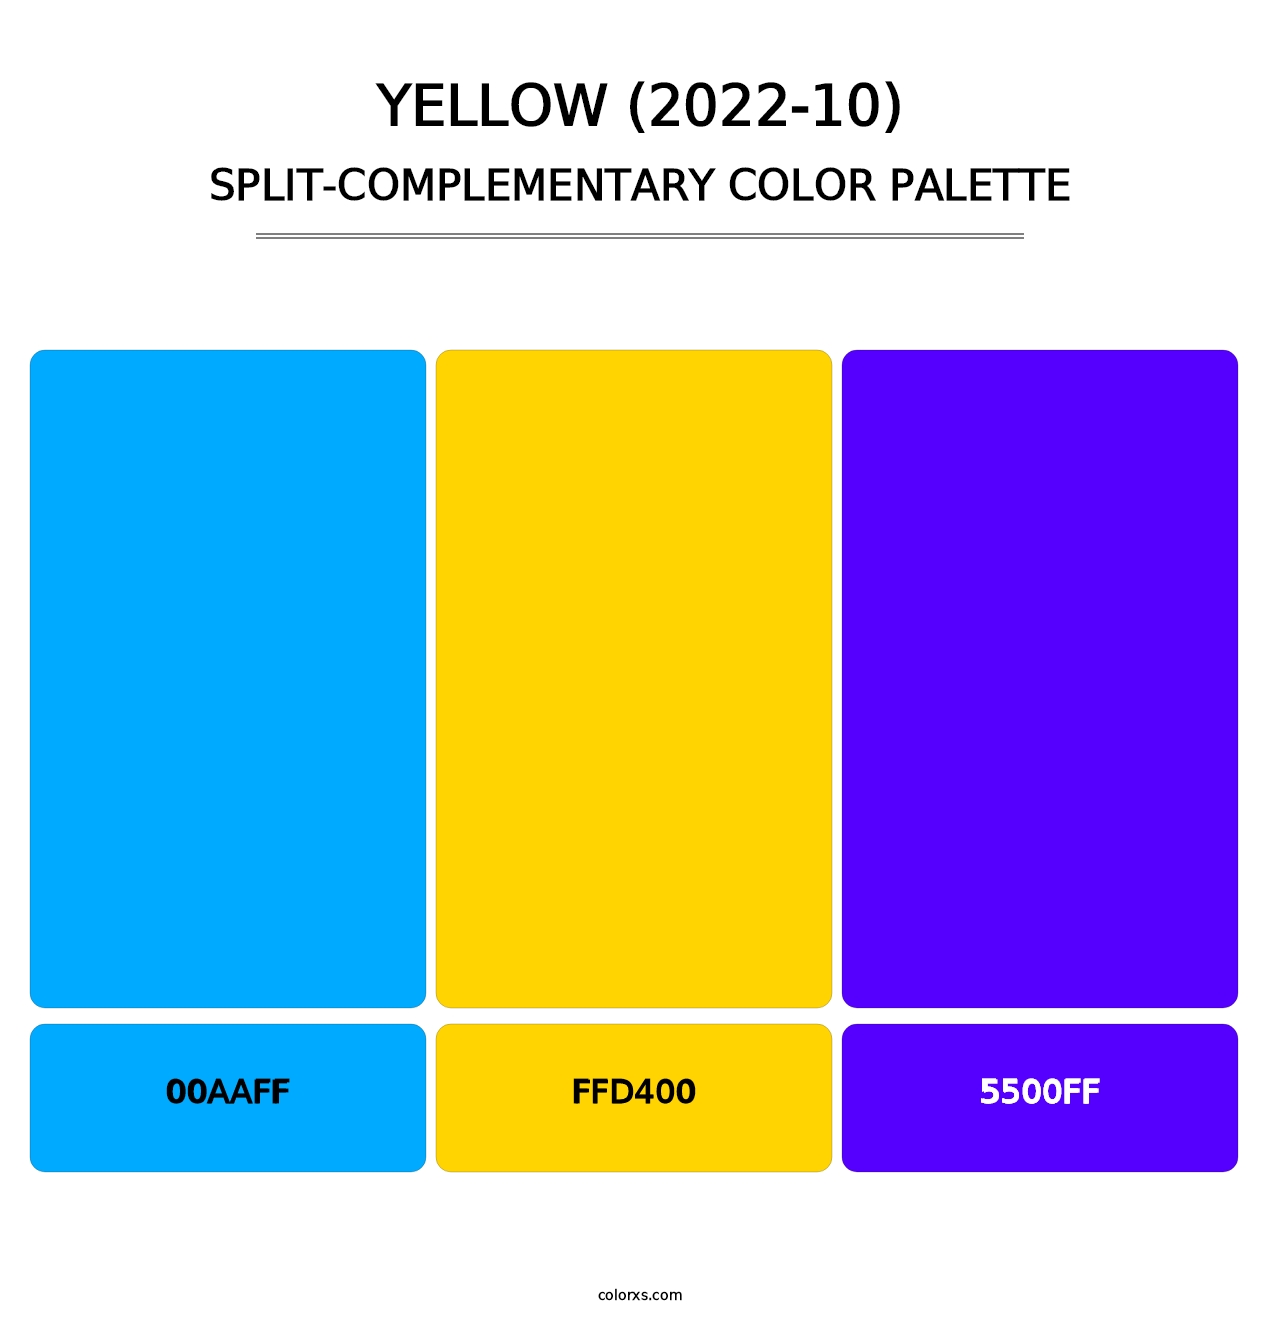 Yellow (2022-10) - Split-Complementary Color Palette